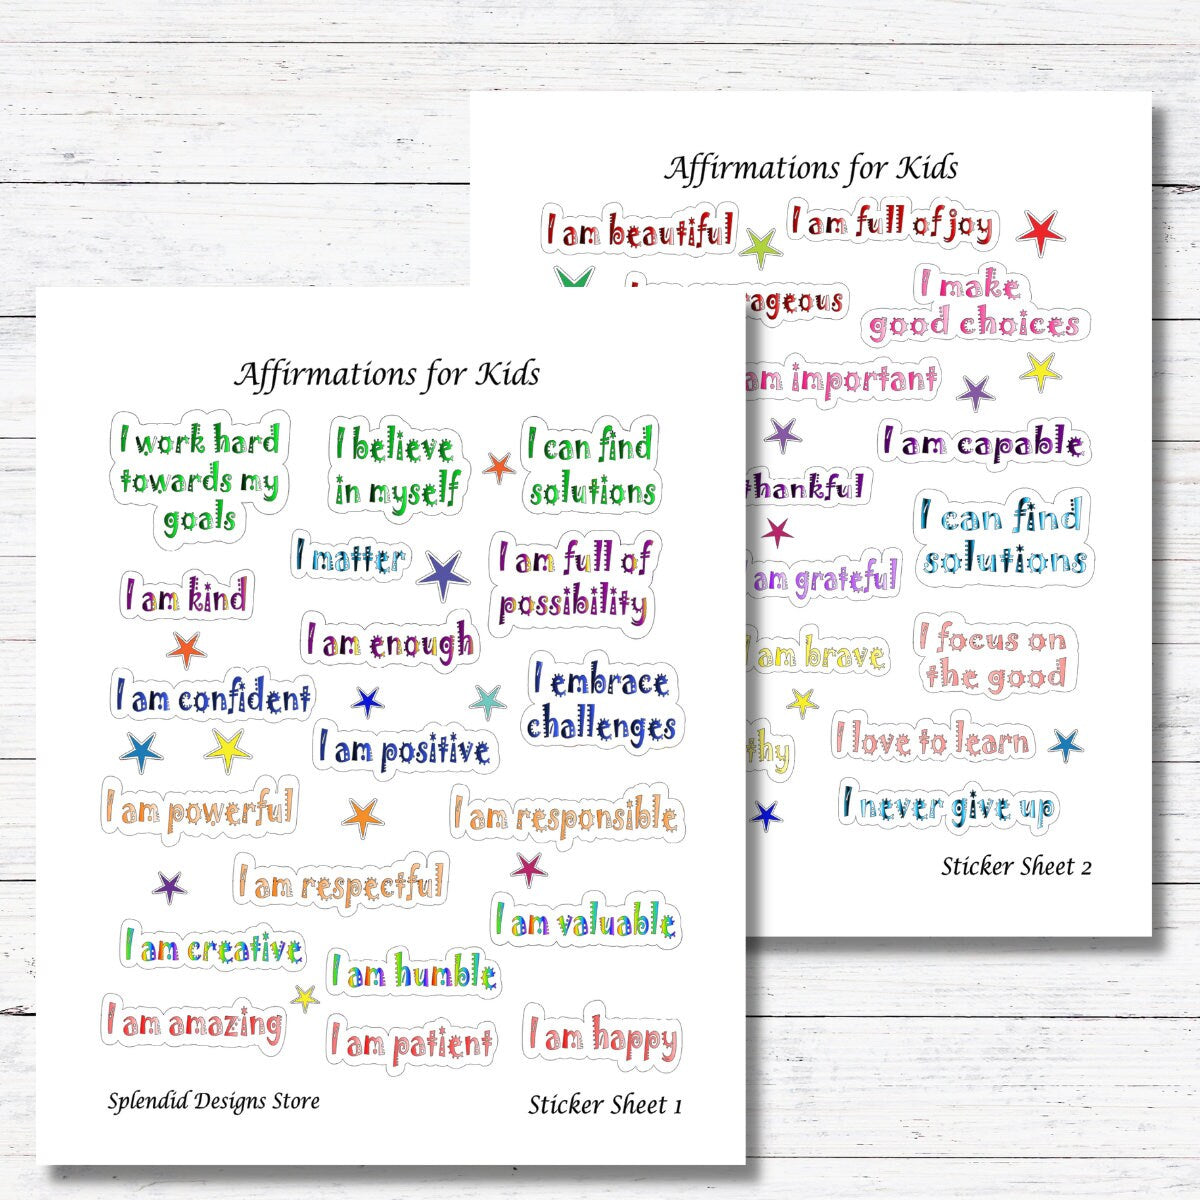 Affirmations for Kids, Mini Stickers, Afirmation Stickers for Kids, Self-Confidence Stickers for Kids, Motivational Stickers for Kids